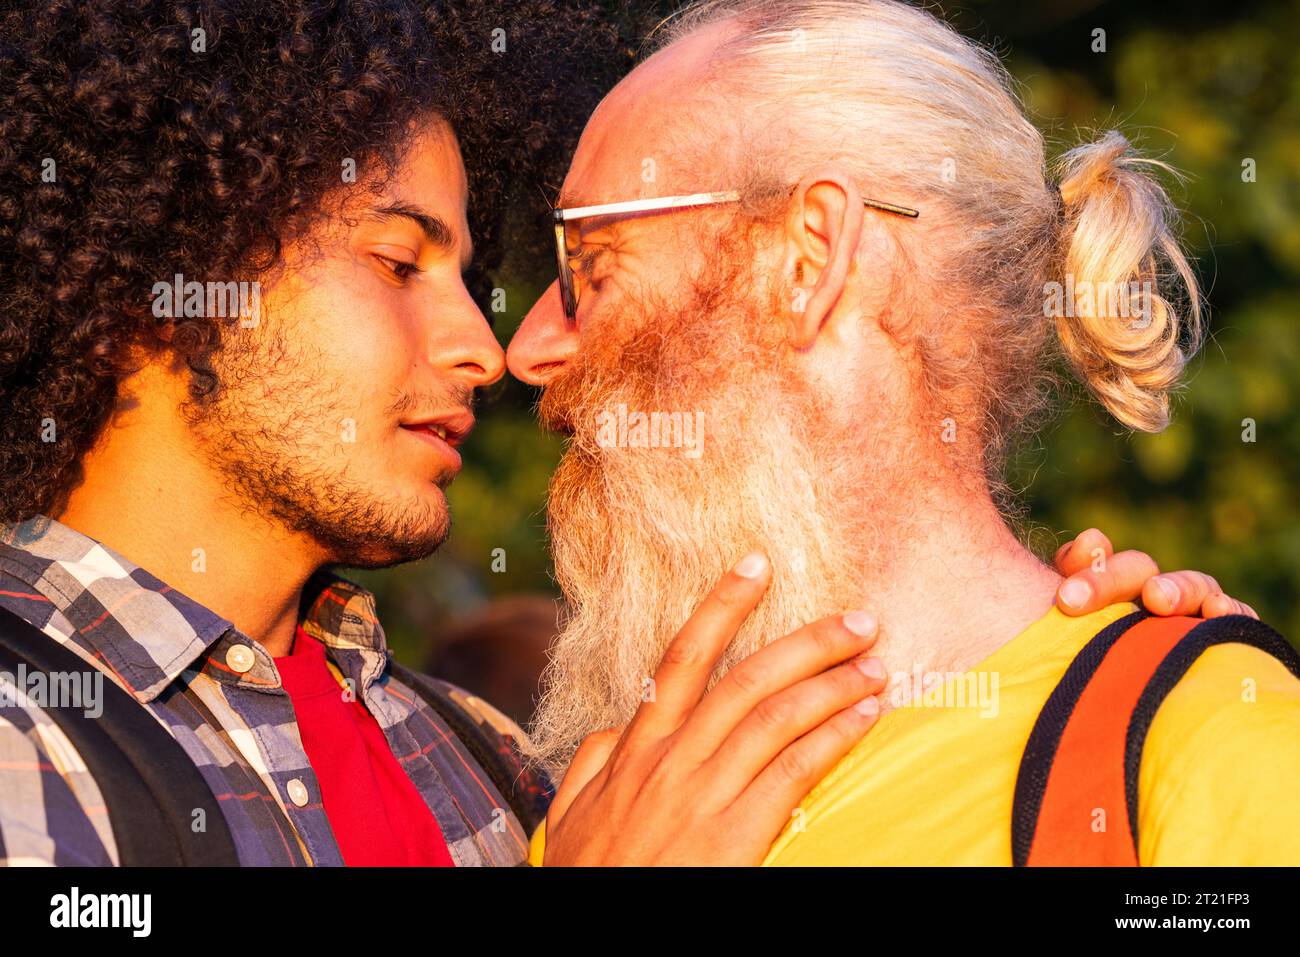 A tender and passionate moment captured as an attractive gay millennial Arabian man with long curly hair and his older Caucasian male lover with long grey hair and a beard gaze at each other, about to share a passionate kiss in the warm embrace of the setting sun. Intimate Sunset Moment, Gay Couple's Kiss. High quality photo Stock Photo